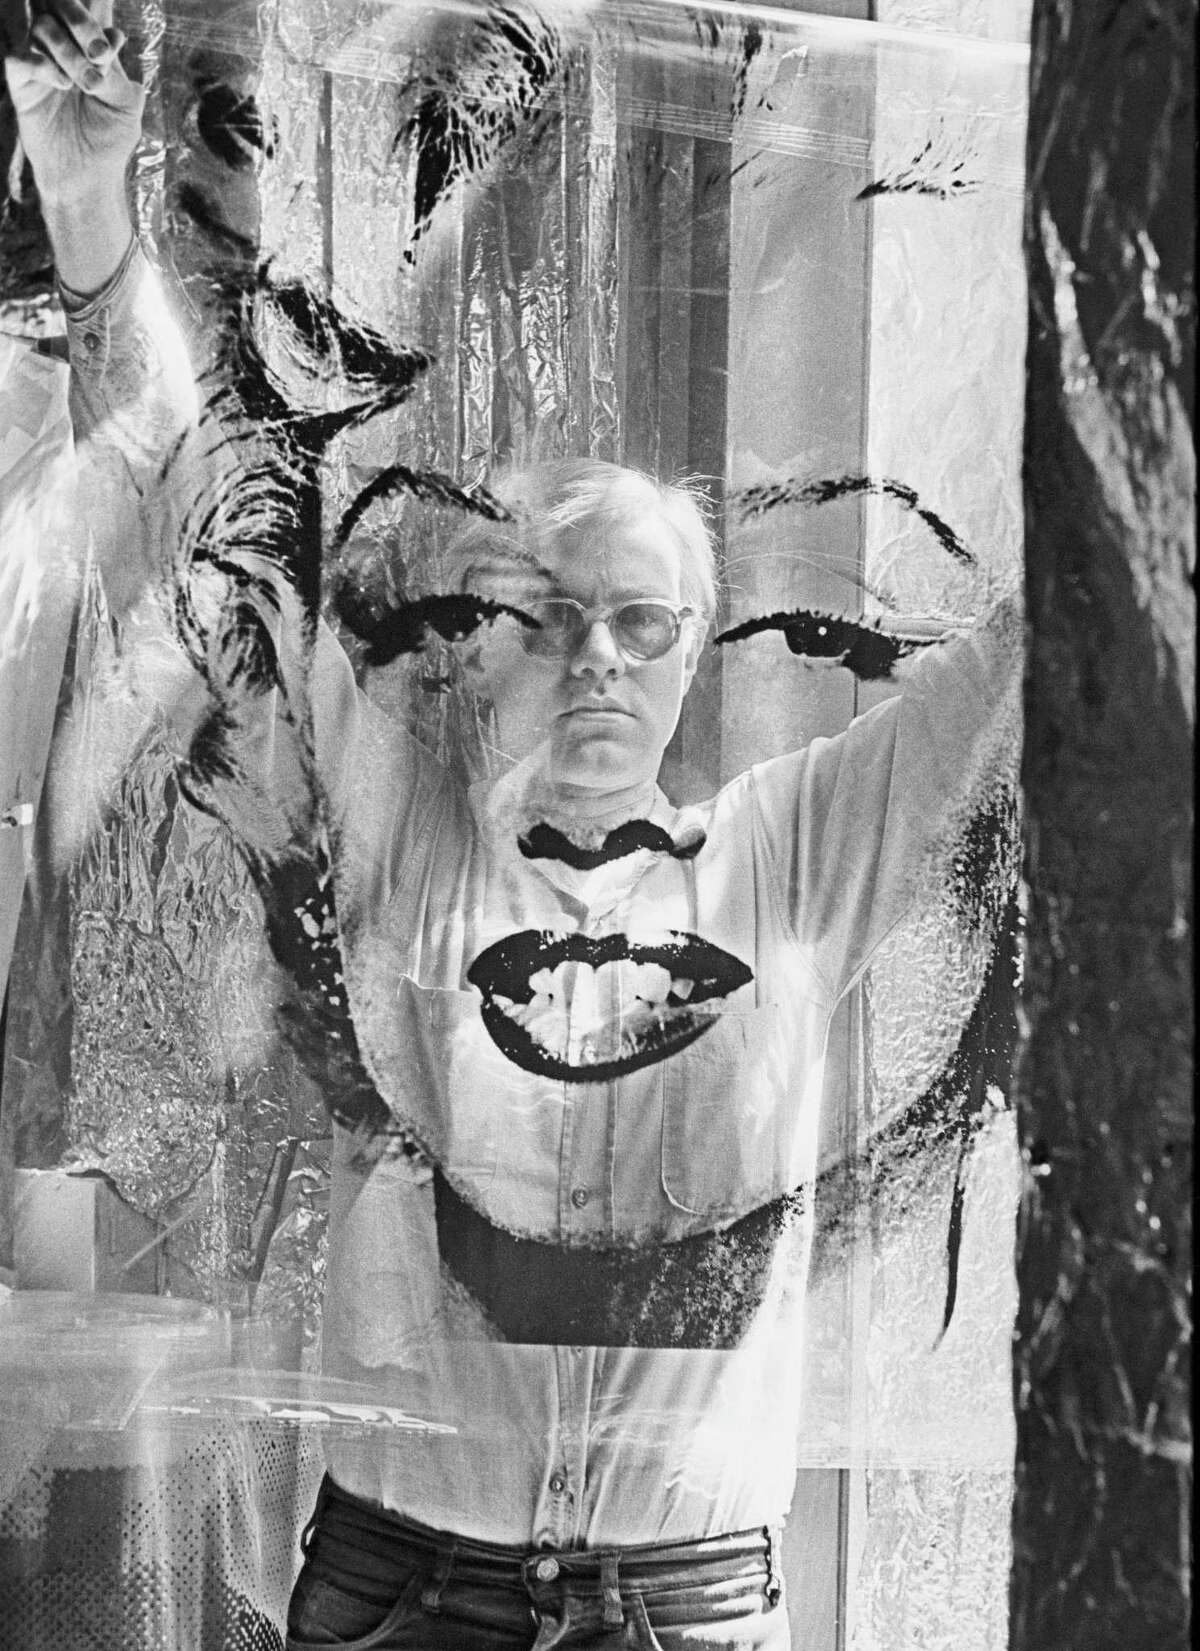 In this 1964 photo provided by Allen Cooper Enterprises, artist Andy Warhol holds an unrolled acetate of "Marilyn" in his New York studio called "The Factory." The photo will be featured in an exhibit entitled: "Before They Were Famous: Behind the Lens of William John Kennedy," which runs through April 29, 2012 at the Site/109 gallery in New York. (AP Photo/William John Kennedy via Allen Cooper Enterprises)